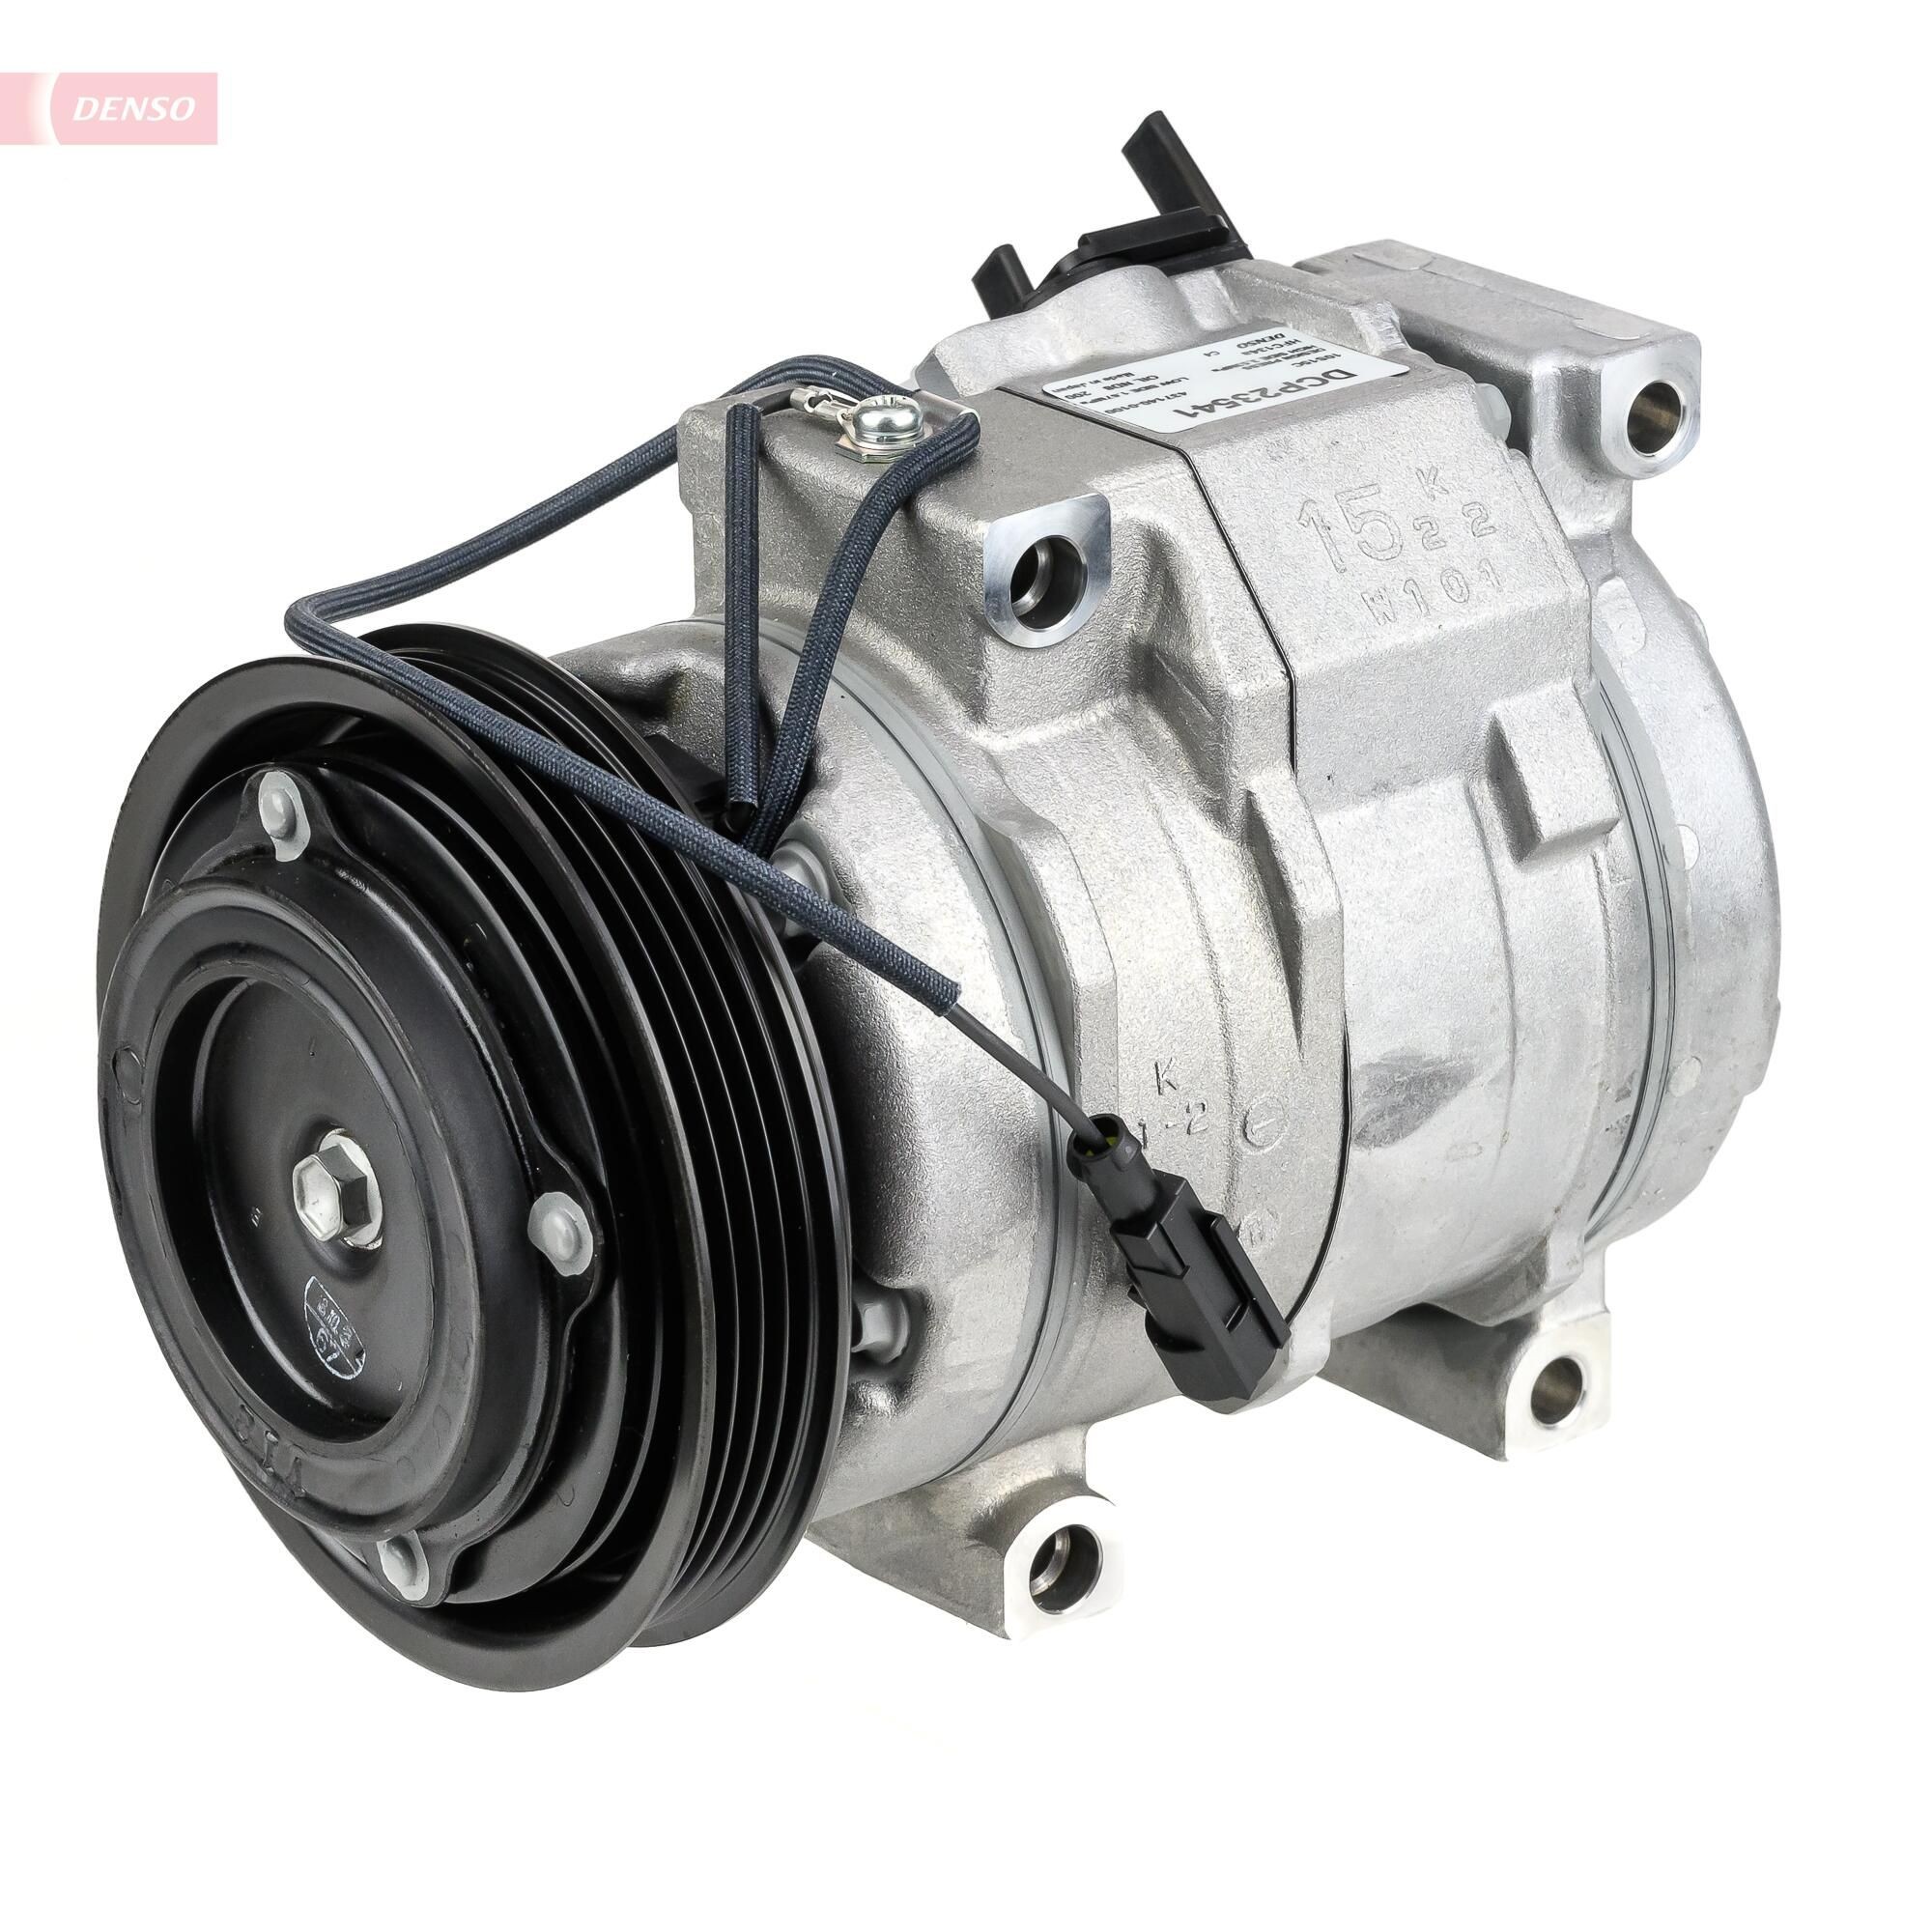 DENSO 10S15C, 12V, PAG 46, R 134a, with magnetic clutch Belt Pulley Ø: 120mm, Number of grooves: 4 AC compressor DCP23541 buy